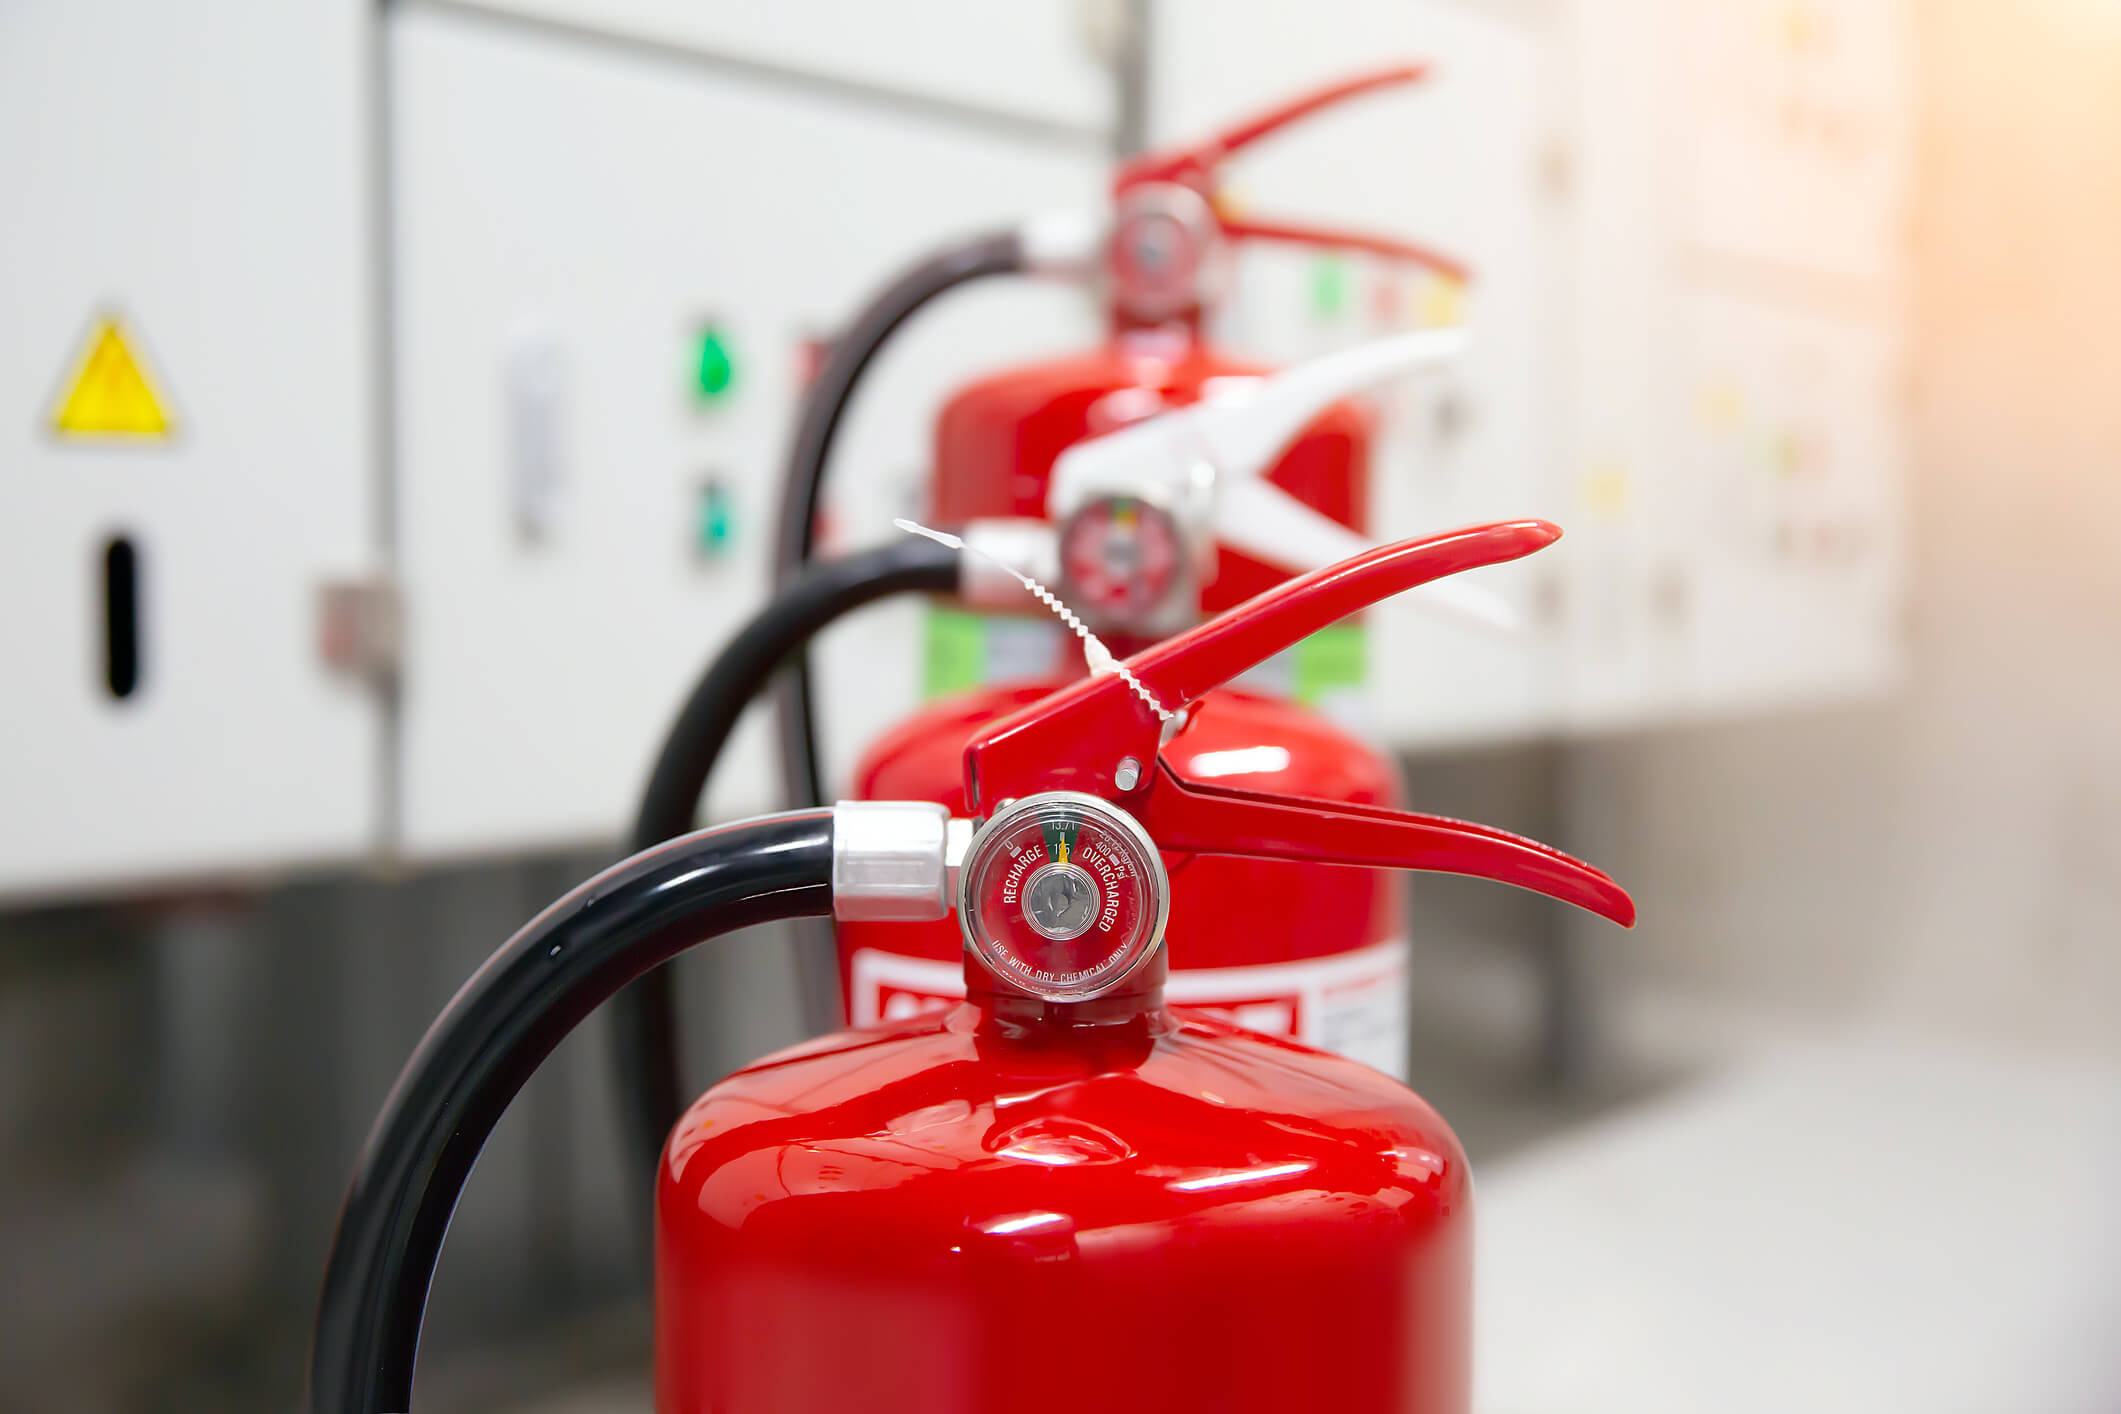 How to Use a Wet Chemical Extinguisher